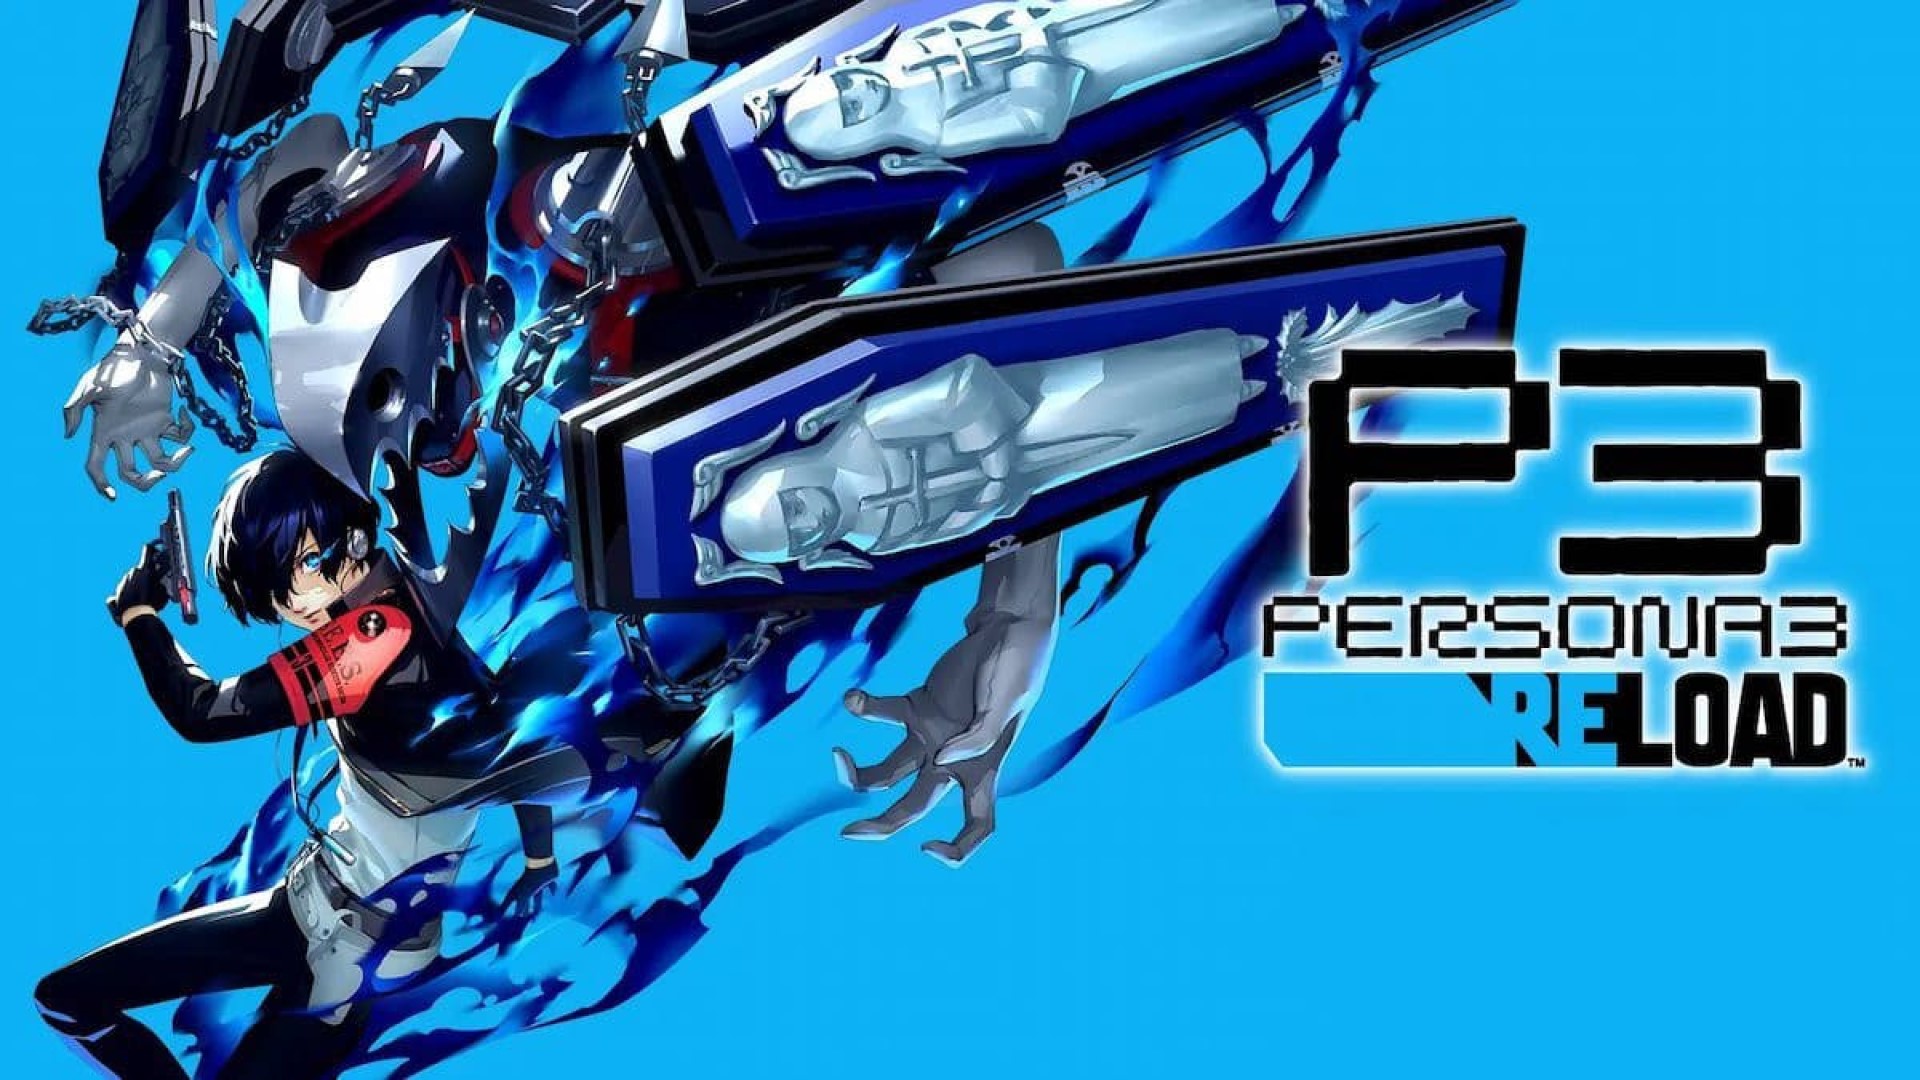 Persona 3 Reload Sold 1 Million Units in its First Week, Fastest-Selling Atlus Game to Date